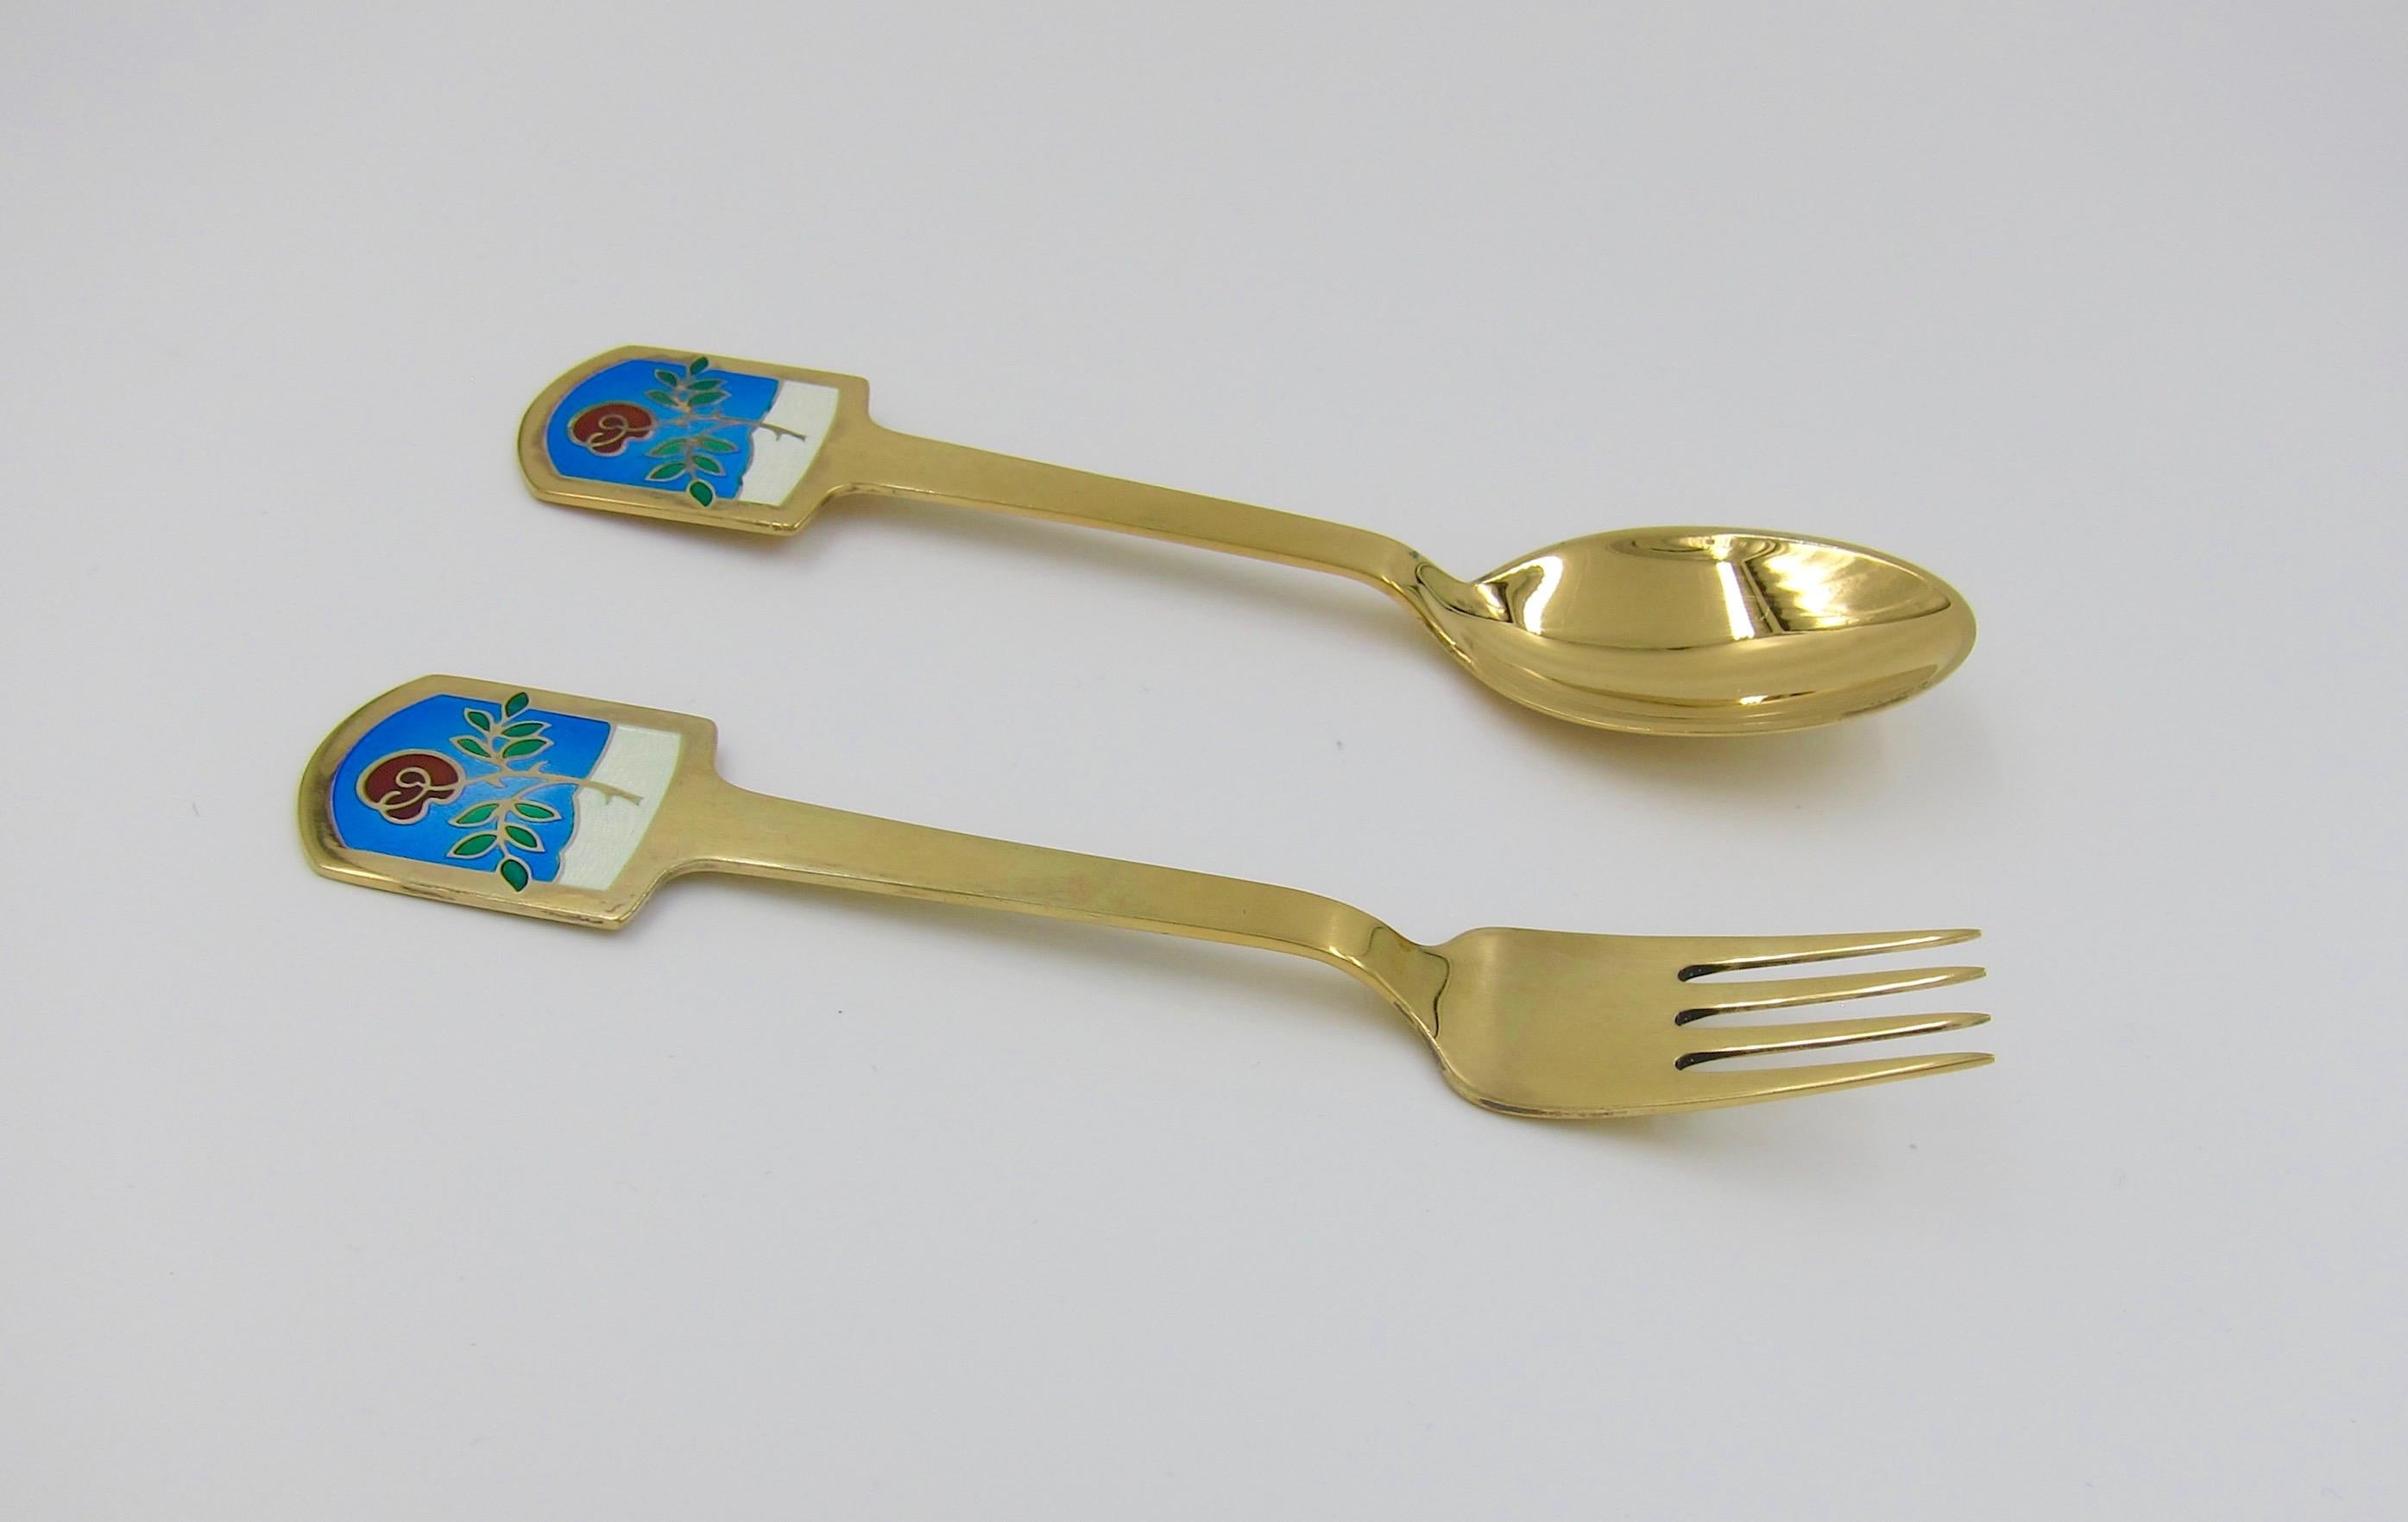 1977 Anton Michelsen Gilt Silver and Enamel Christmas Fork and Spoon Set In Good Condition For Sale In Los Angeles, CA